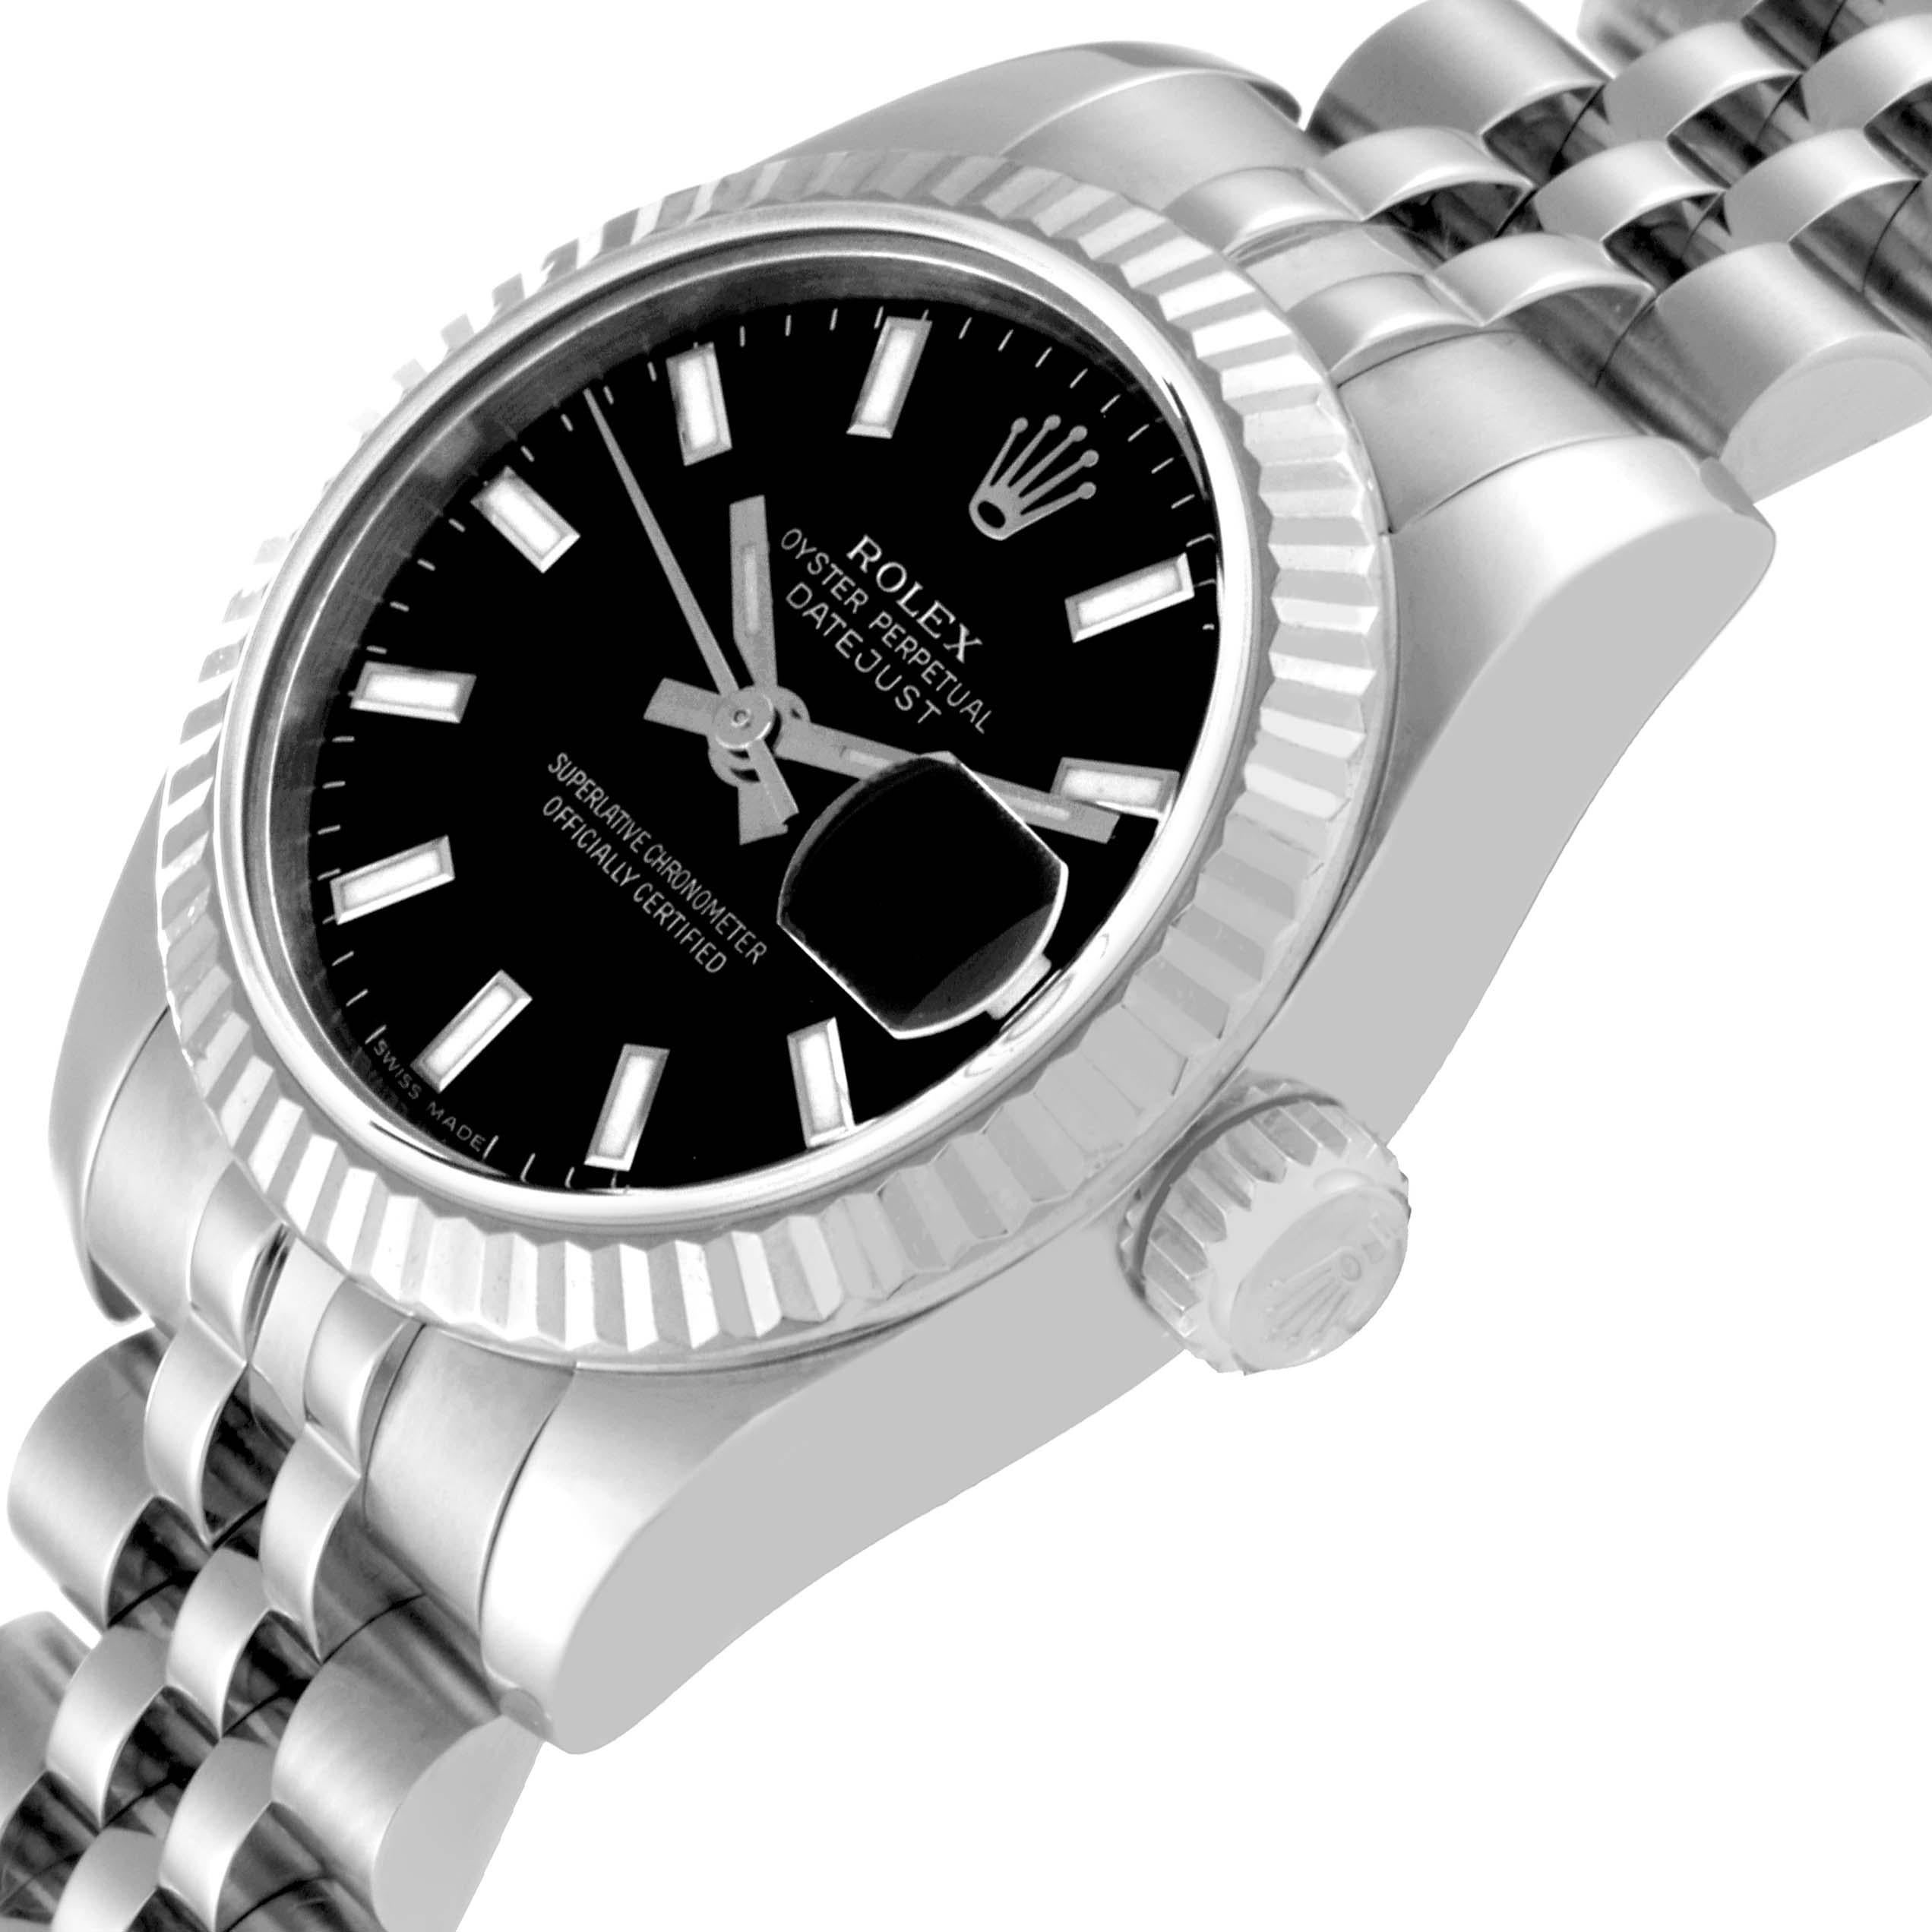 Rolex Datejust Steel White Gold Black Dial Ladies Watch 179174 Box Papers In Excellent Condition For Sale In Atlanta, GA